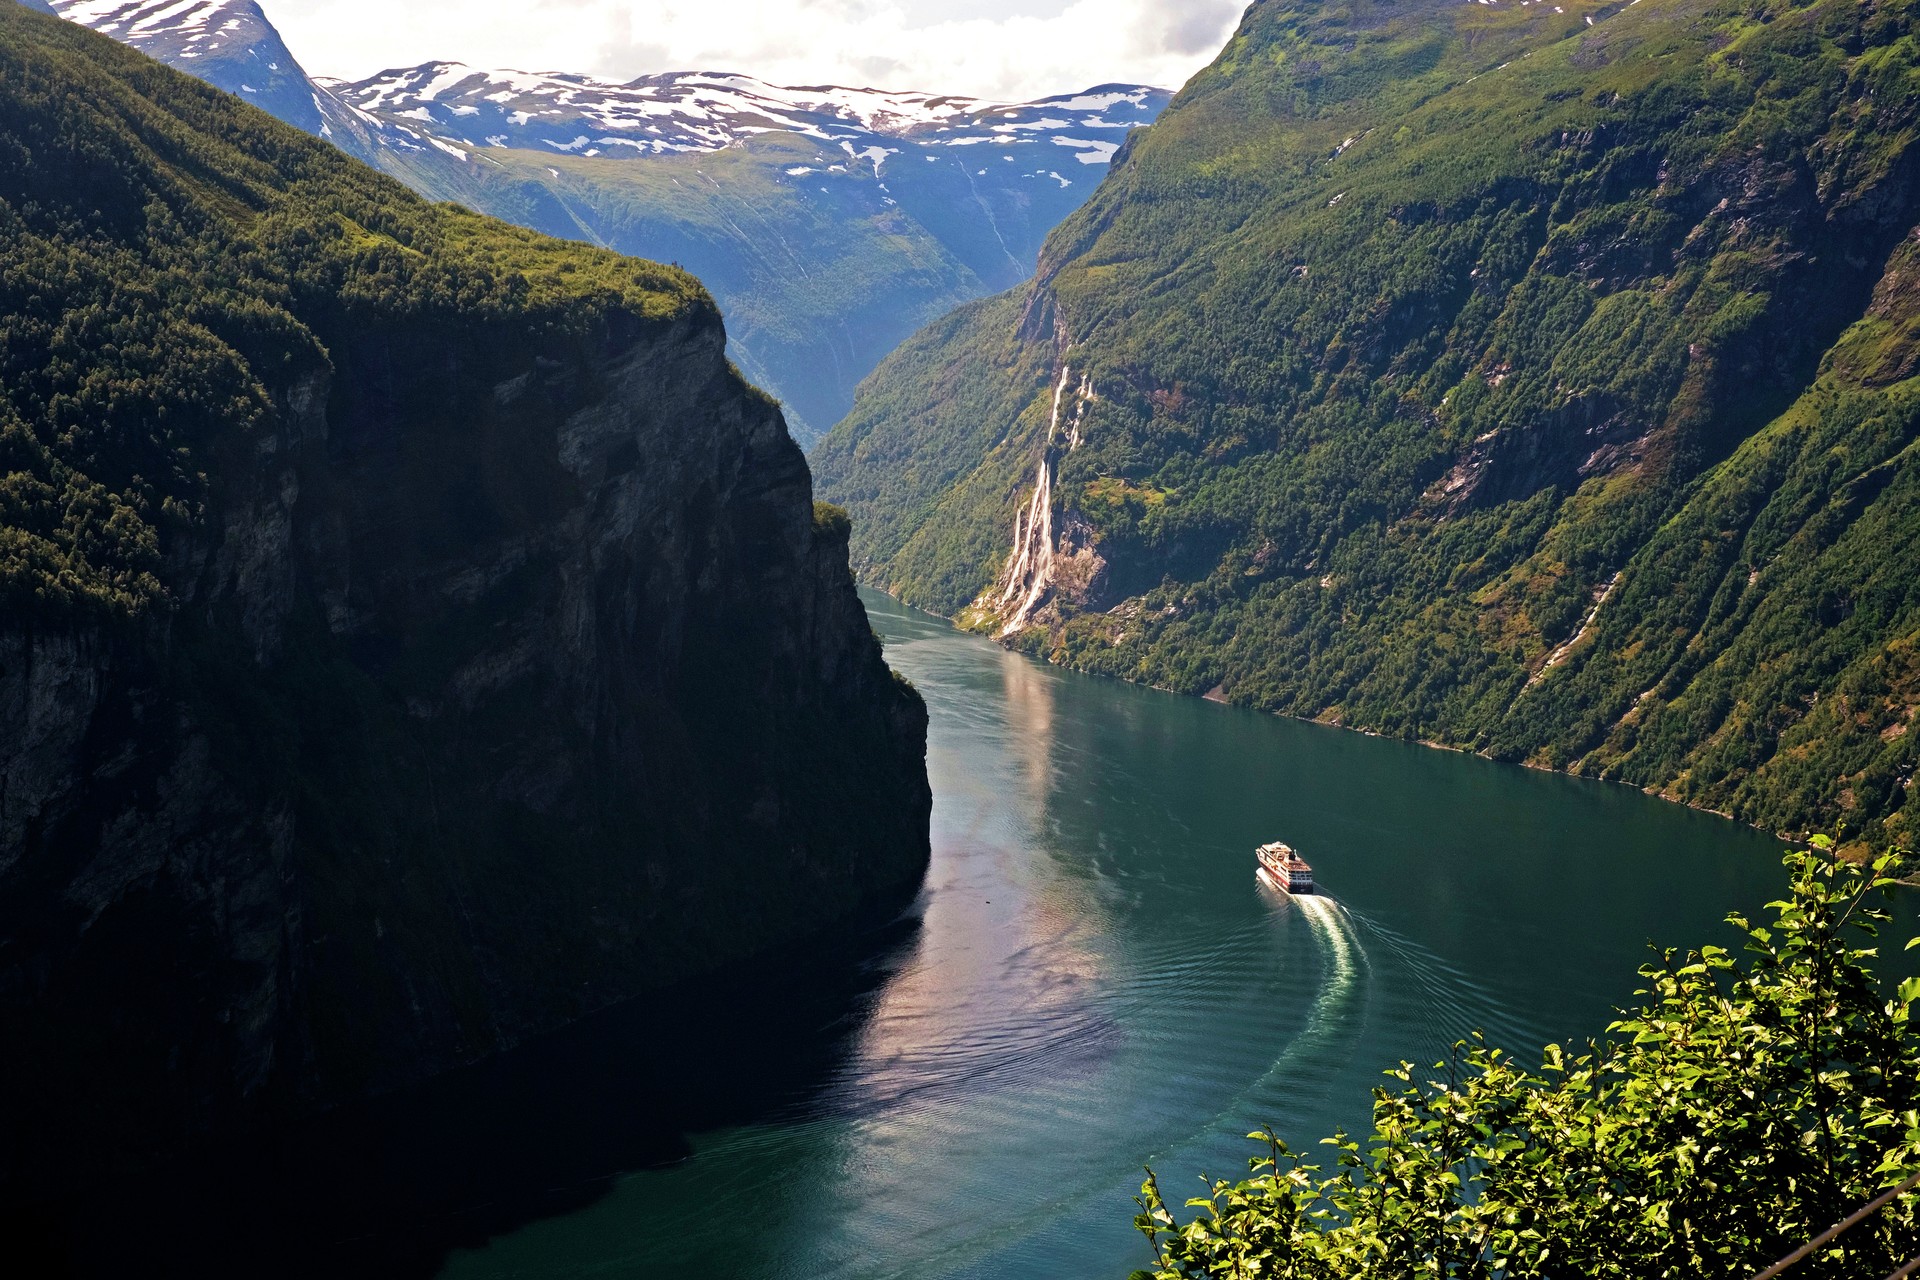 Cruise The Norwegian Fjords Complete Norway Voyage In 16 Days Fjords And Midnight Sun Hurtigruten Norwegian Coastal Express